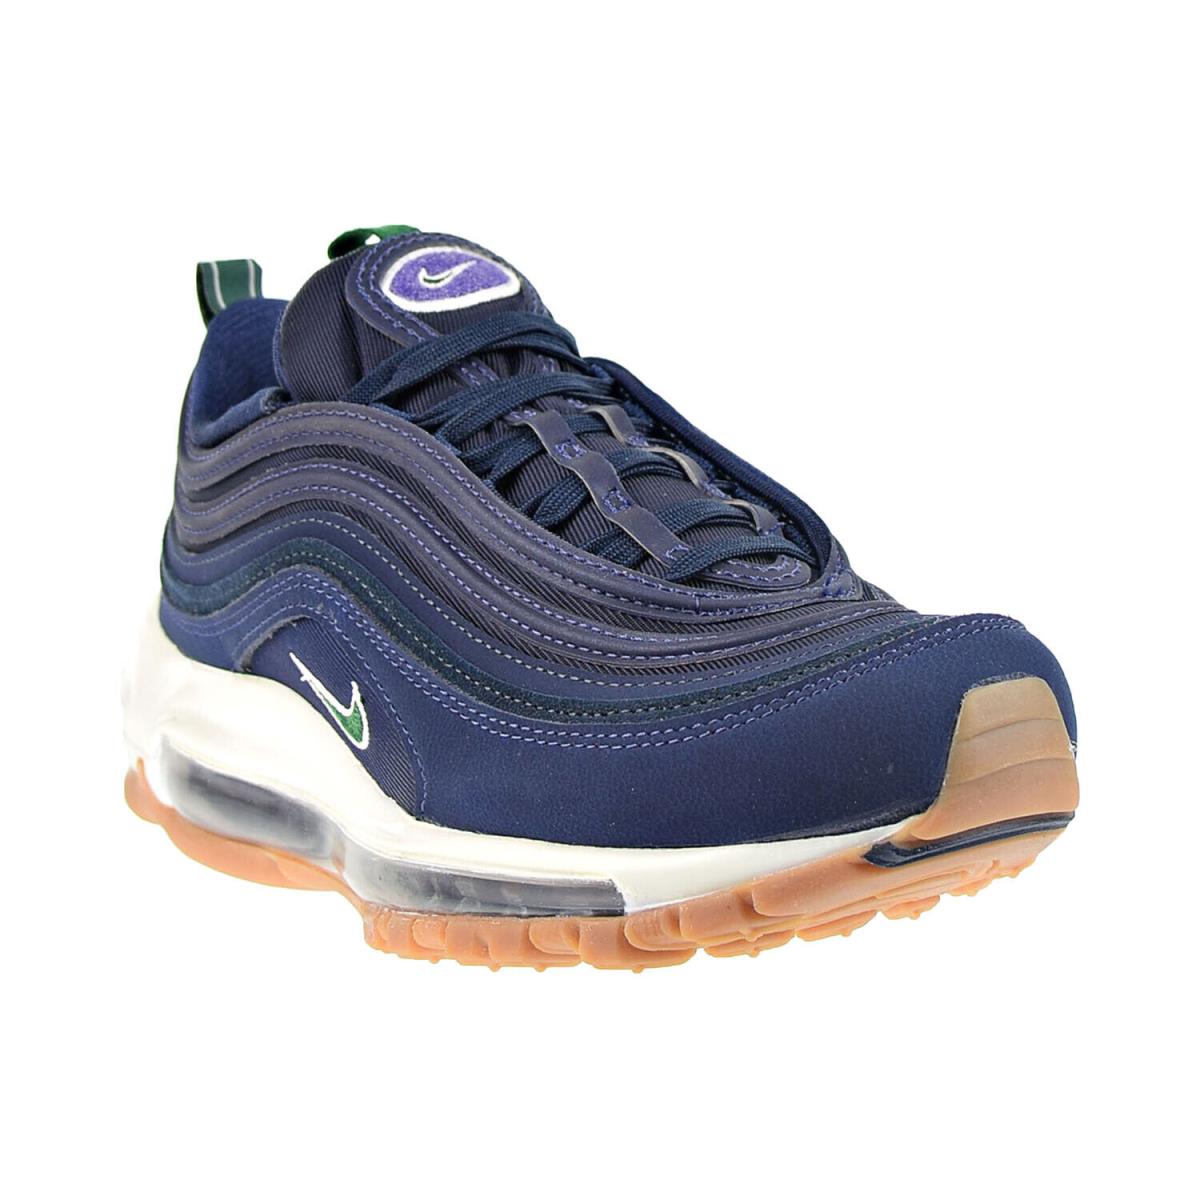 Nike Air Max 97 Women`s Shoes Obsidian/gorge Green DR9774-400 - Gorge Green